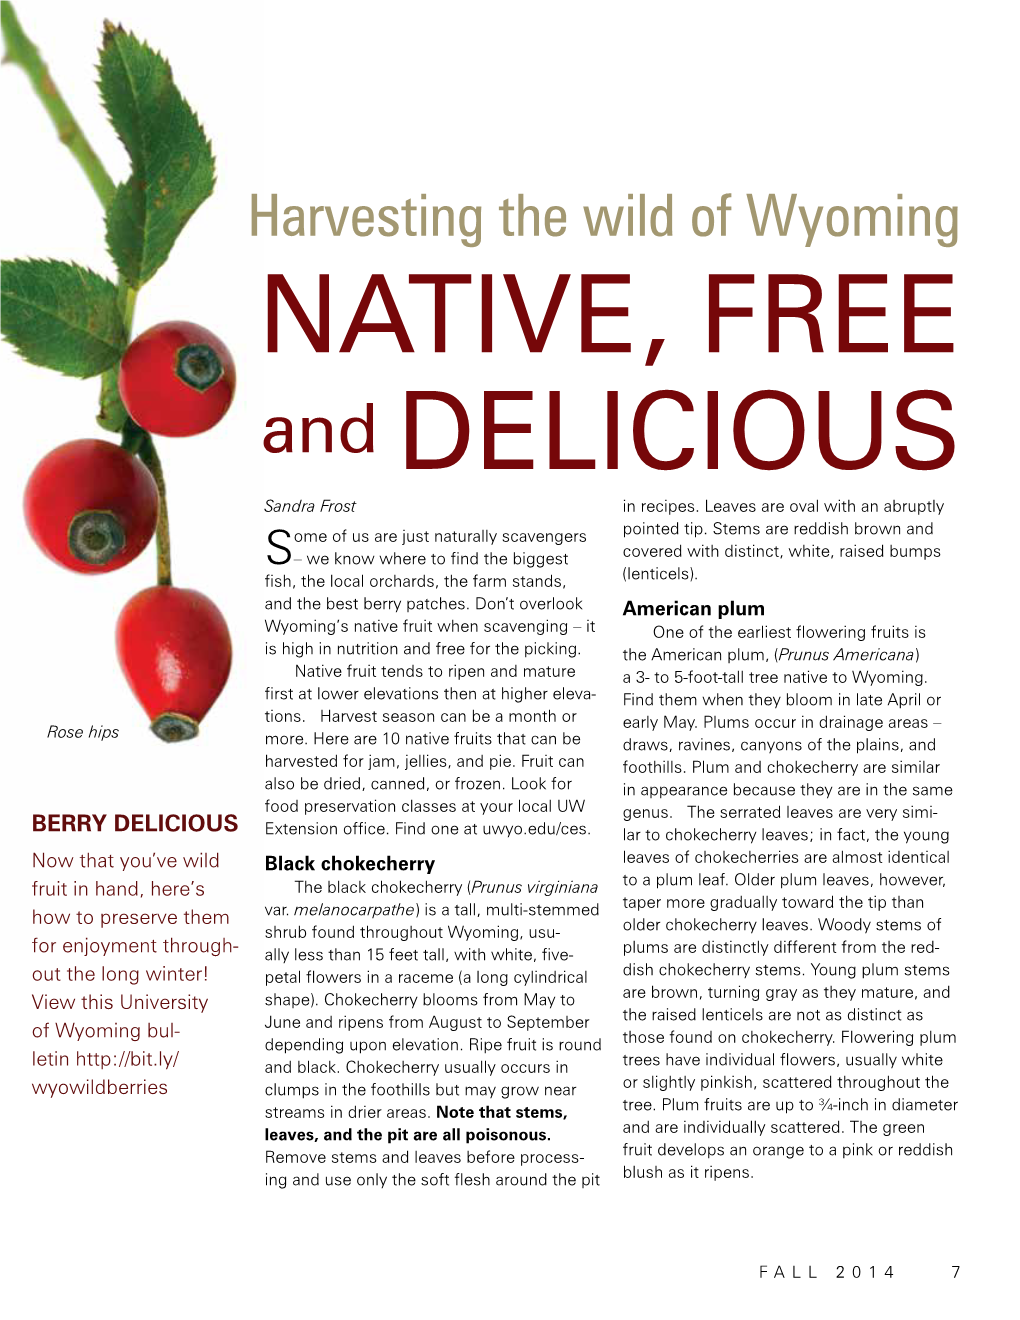 Harvesting the Wild of Wyoming NATIVE, FREE and DELICIOUS Sandra Frost in Recipes